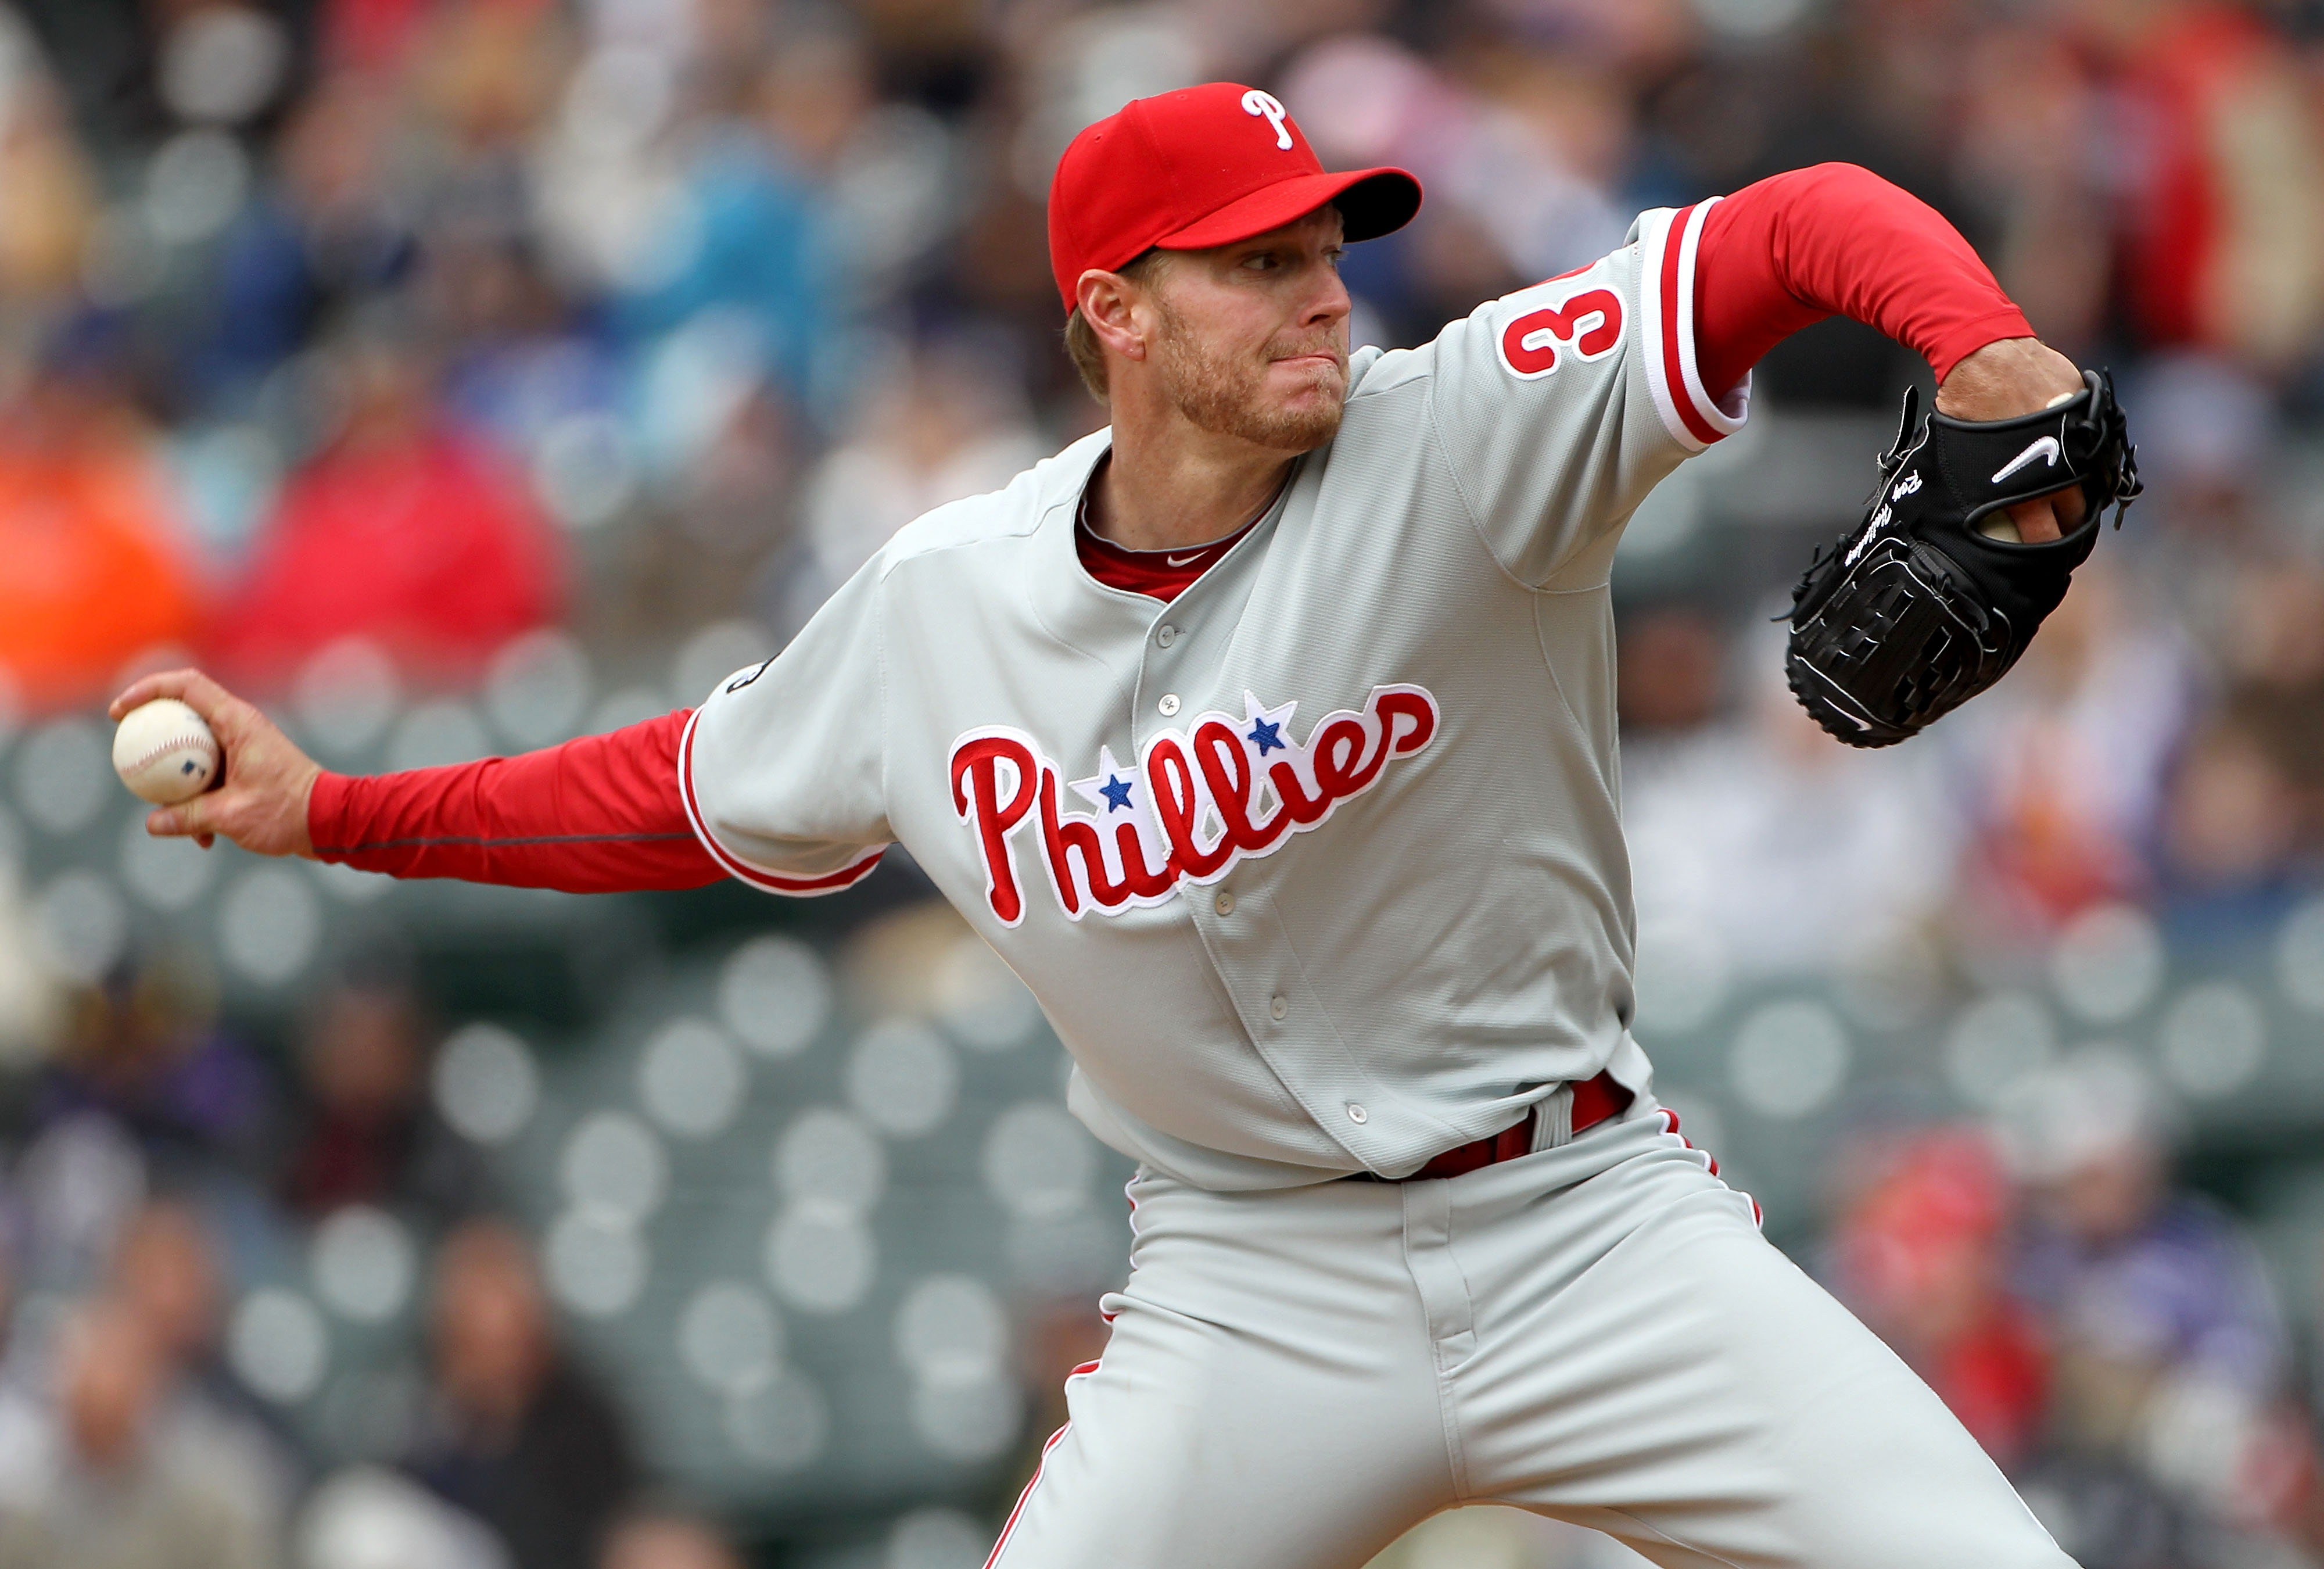 DENVER - MAY 12:  Starting pitcher Roy Halladay #34 of the Philadelphia Phillies delivers against the Colorado Rockies at Coors Field on May 12, 2010 in Denver, Colorado. The Rockies defeated the Phillies 4-3 in 10 innings.  (Photo by Doug Pensinger/Getty